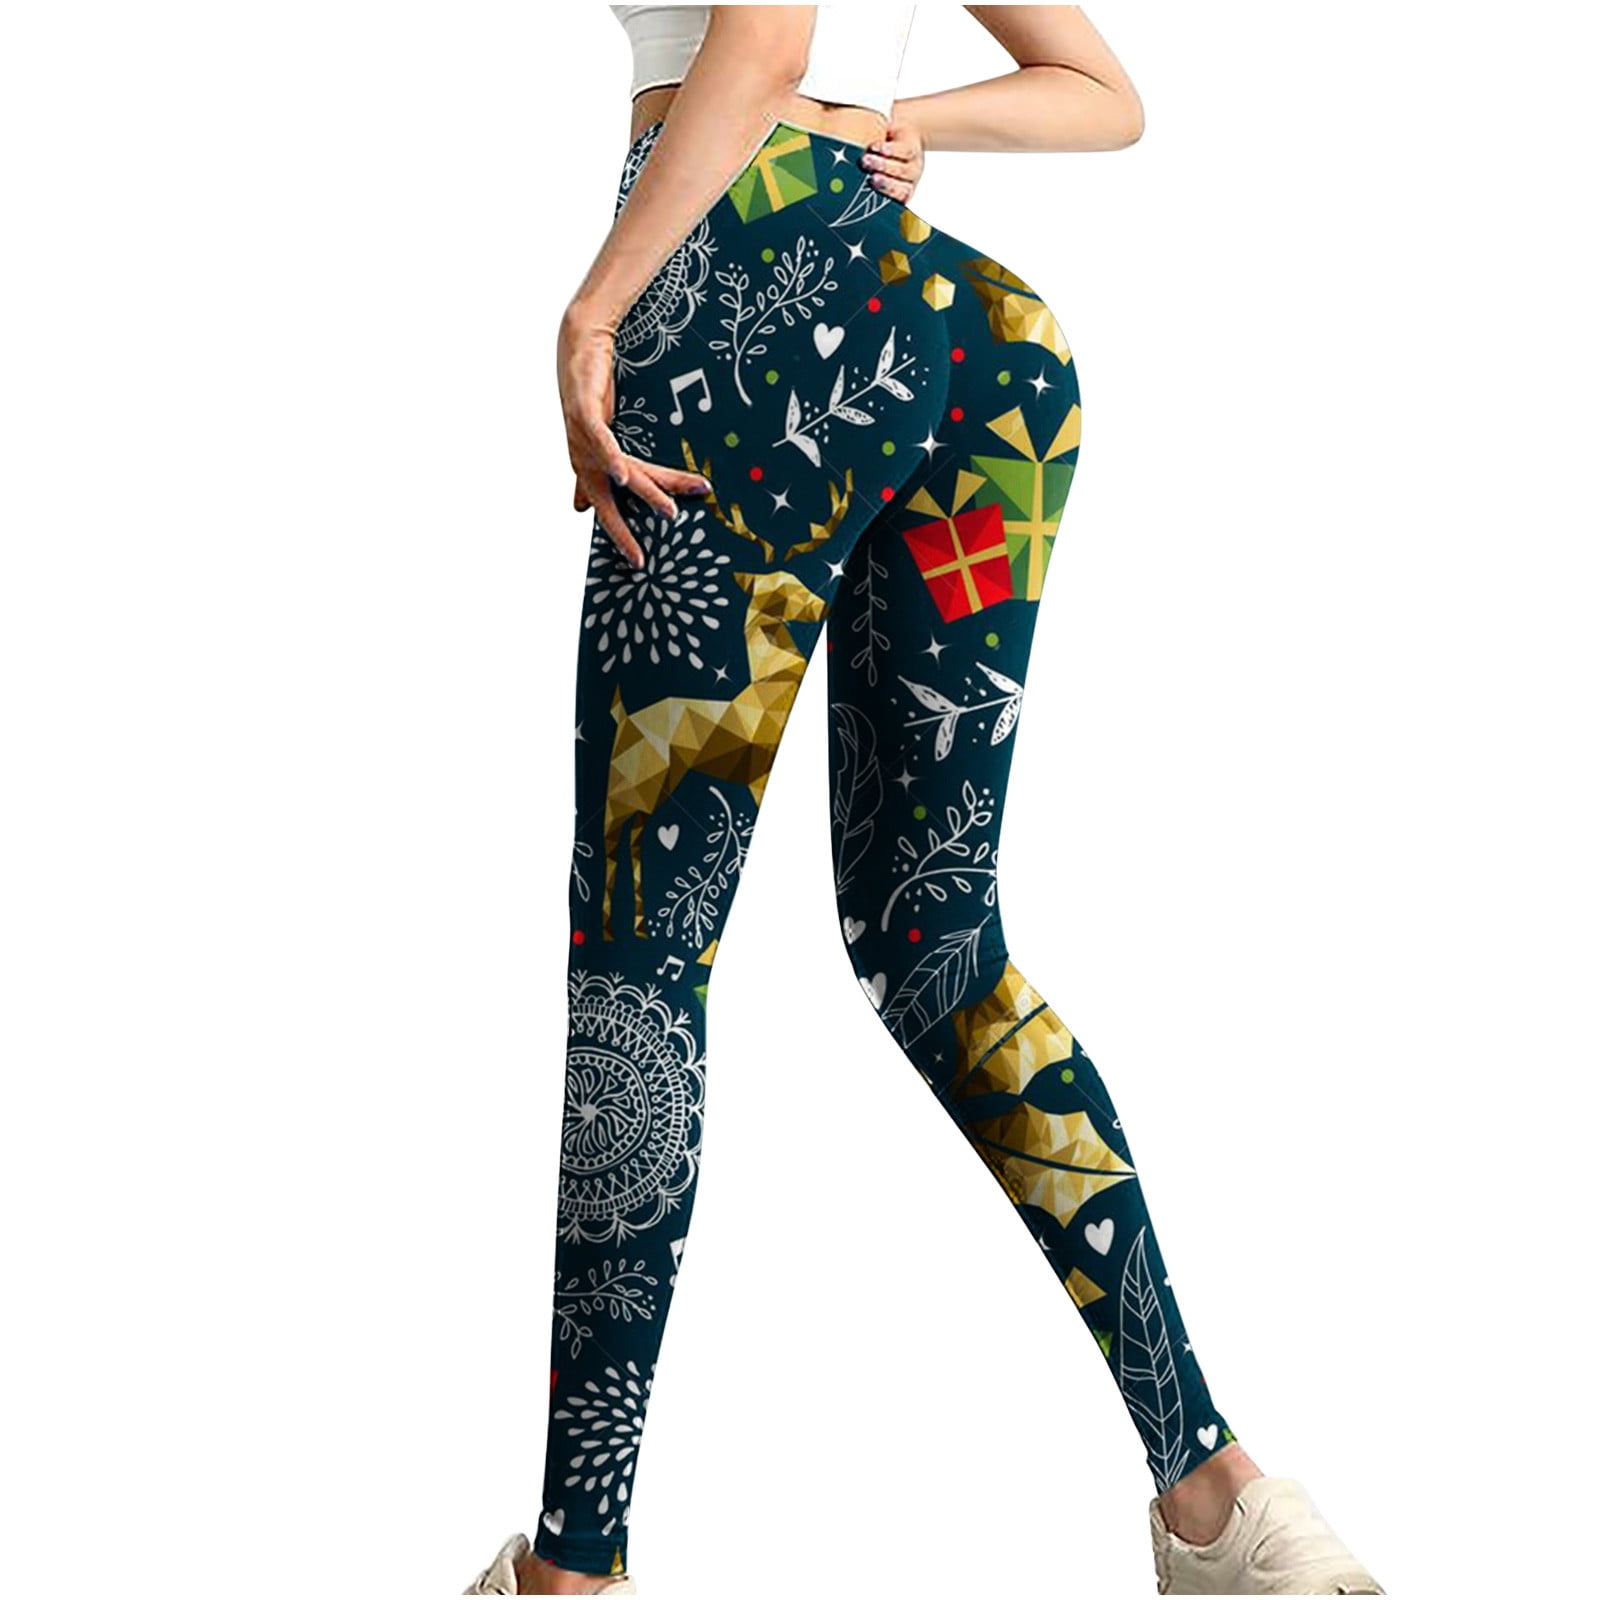 Outique Yoga Pants Mid-Waist Stretch Leggings Women Fashion Christmas Printing Work Out Long Pants Trousers Gothic 